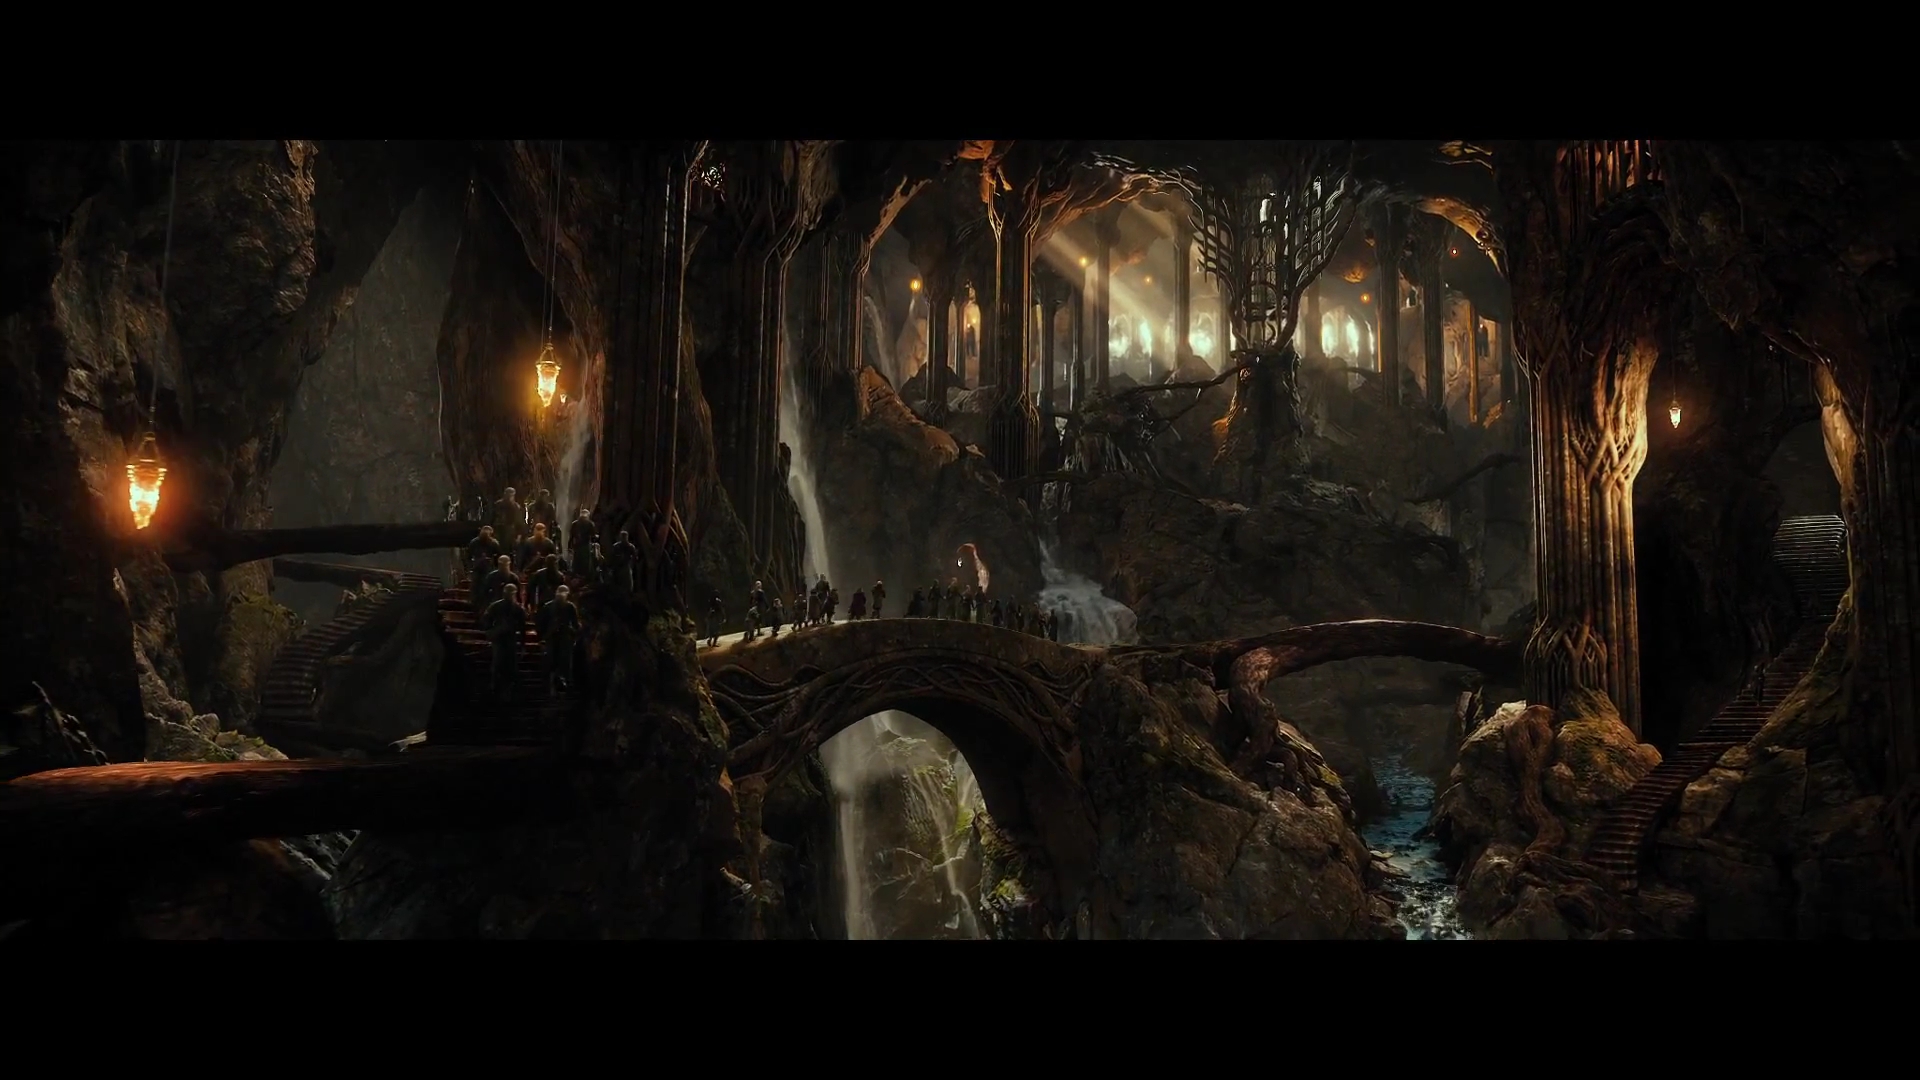 the-hobbit-the-desolation-of-smaug-official-teaser-trailer-hd-mp4_000020061.jpg